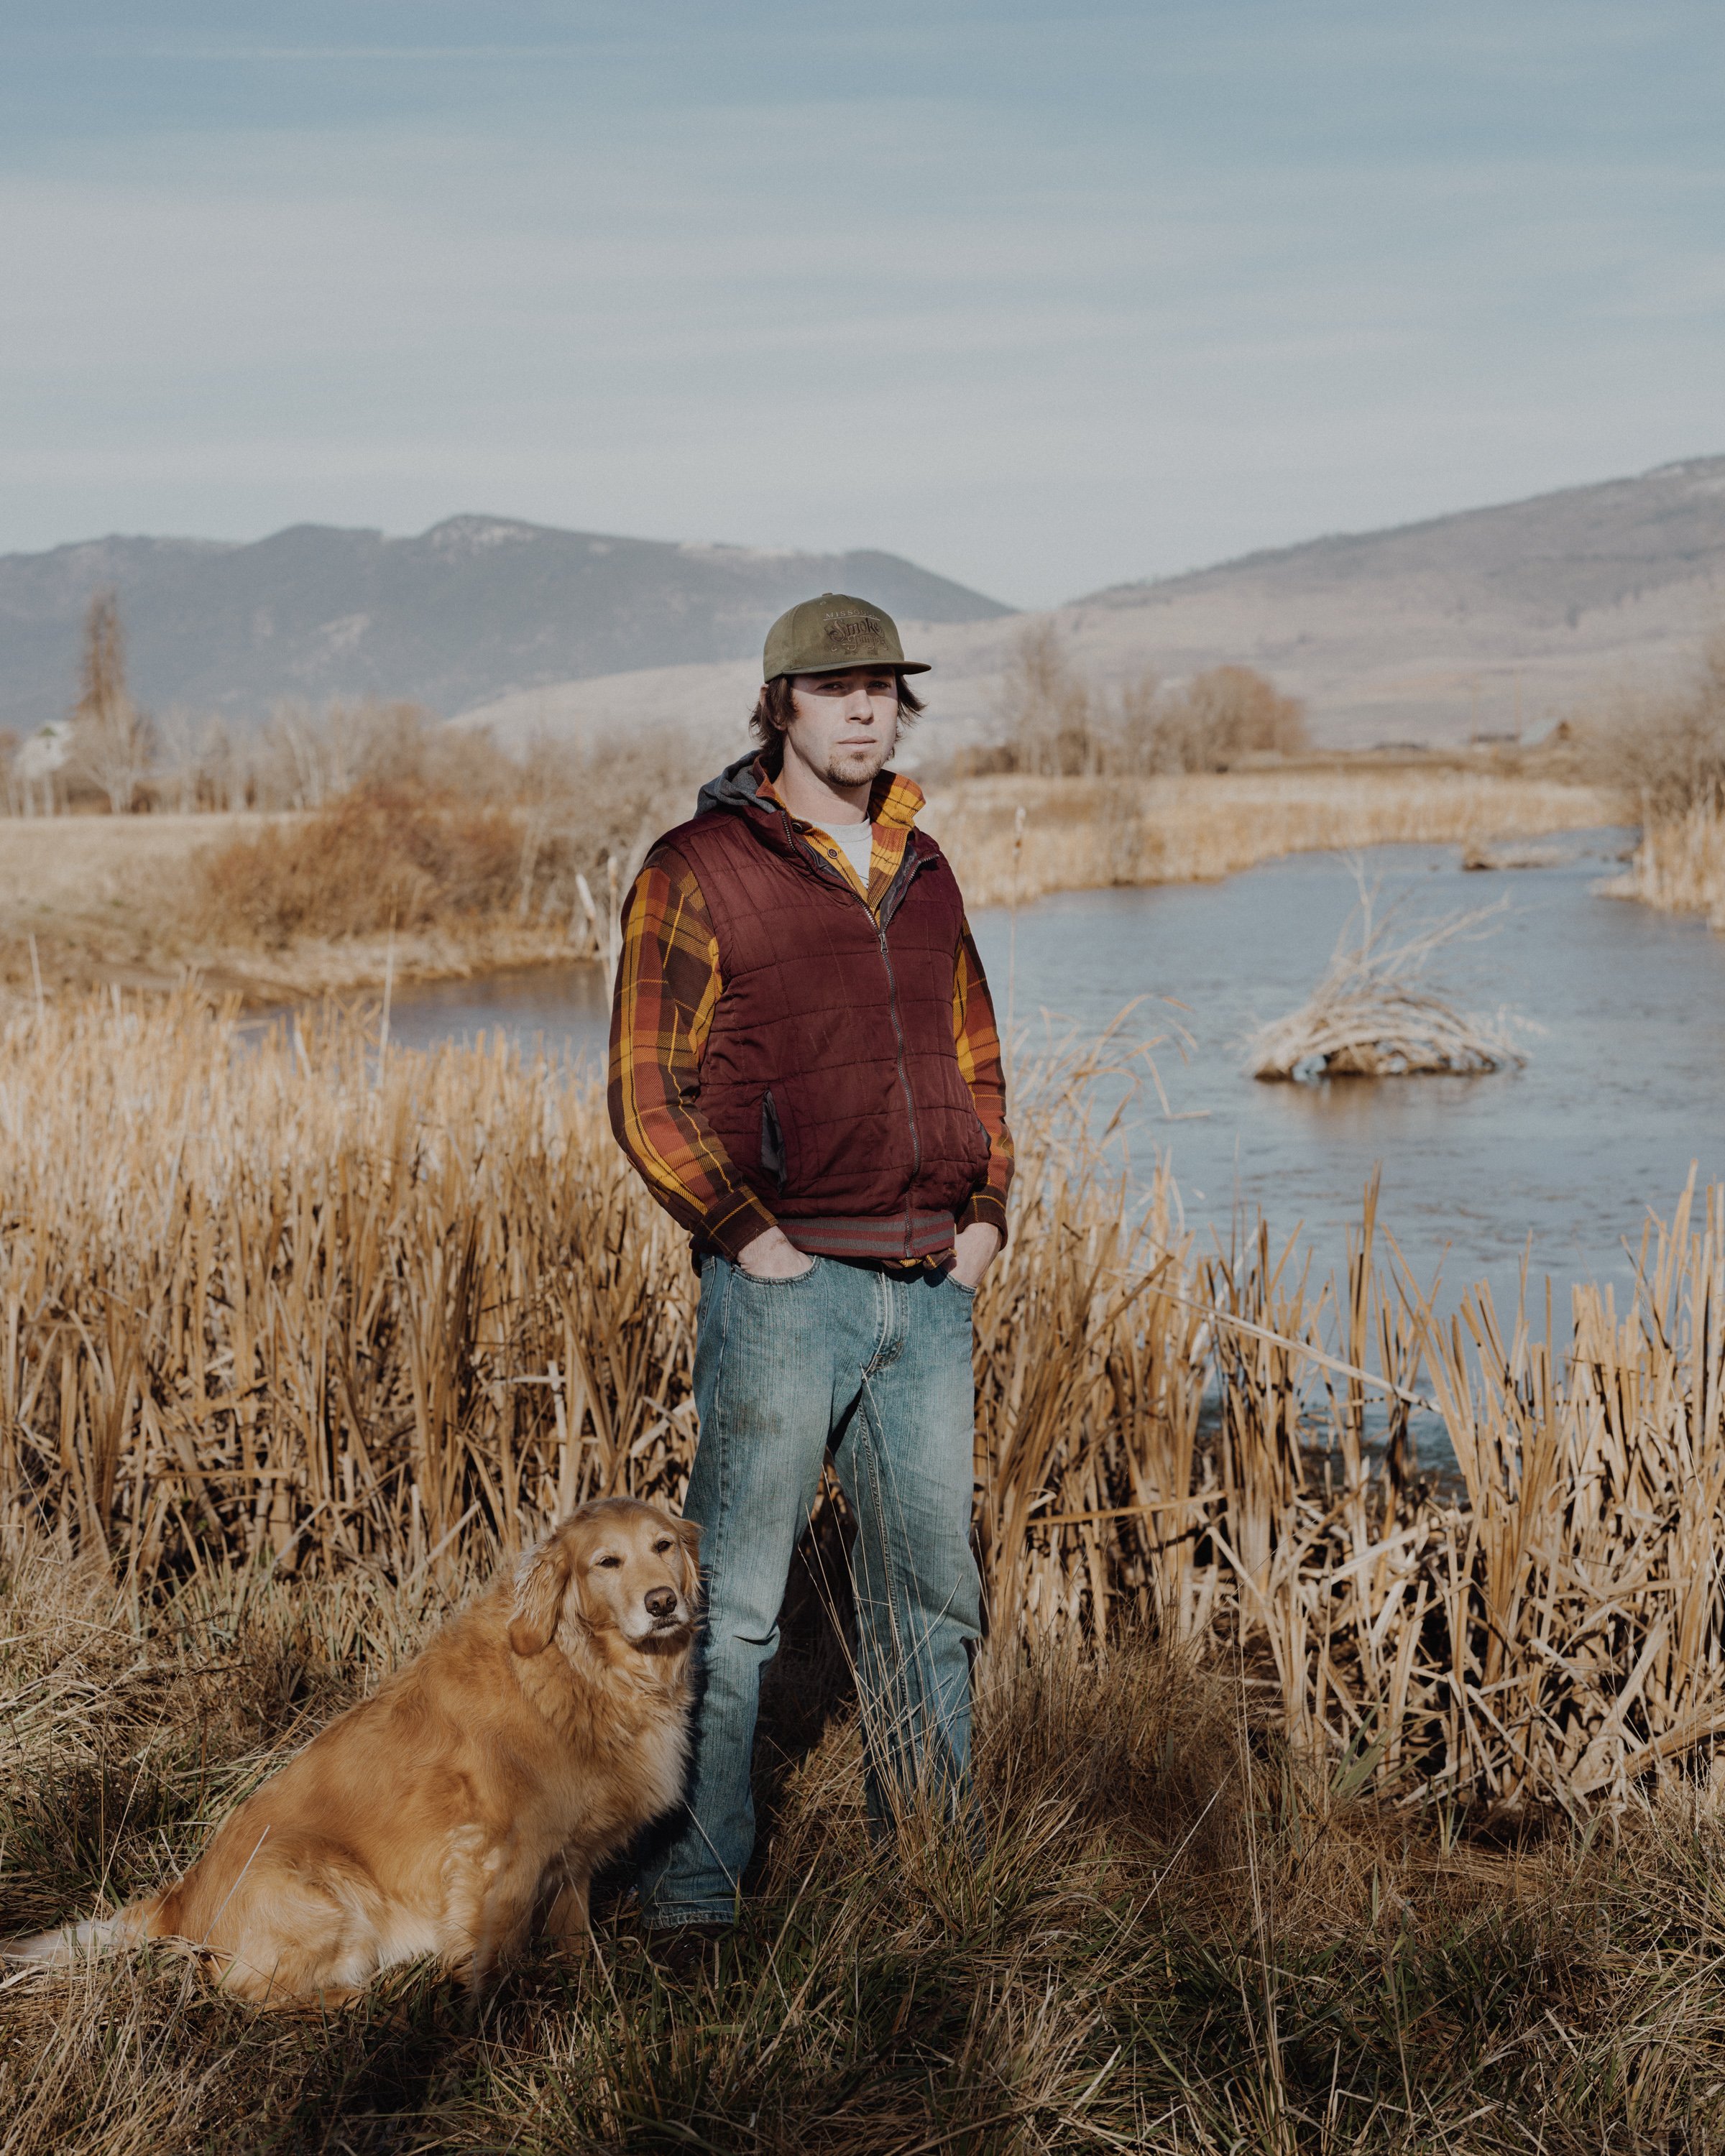  Smokejumper Tyson Lucier with his dog - photographed for  BuzzFeed News  